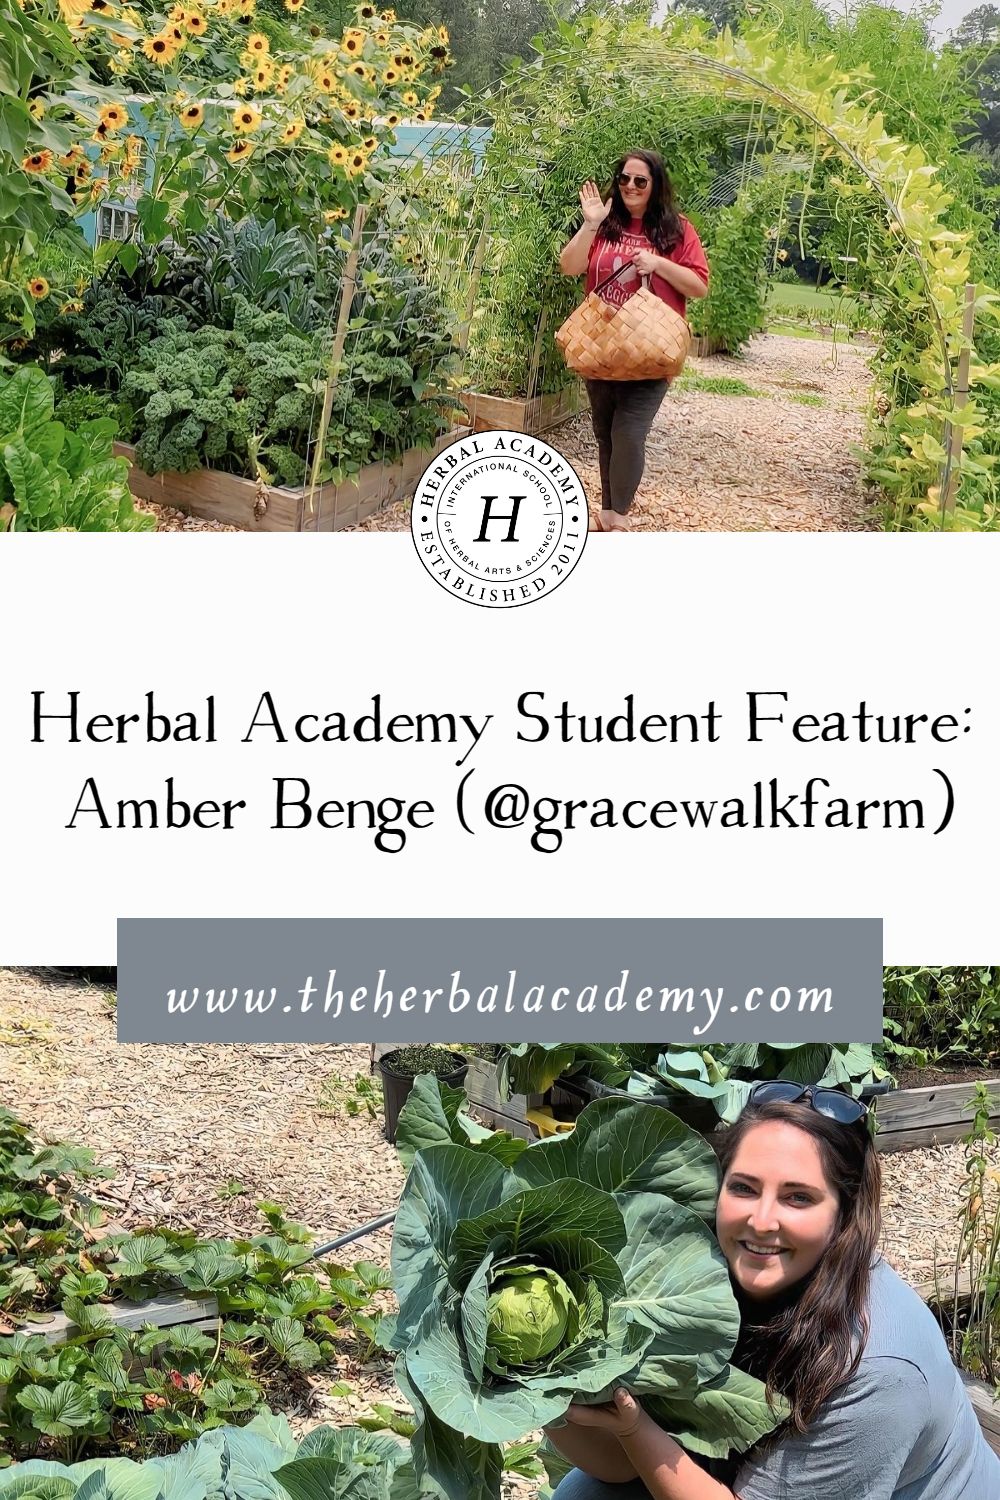 Herbal Academy Student Feature: Amber Benge (@gracewalkfarm) | Herbal Academy | Amber Benge is the owner of Grace Walk Farm where she teaches a gardening course, making money on a homestead, how to grow zinnias, and more!